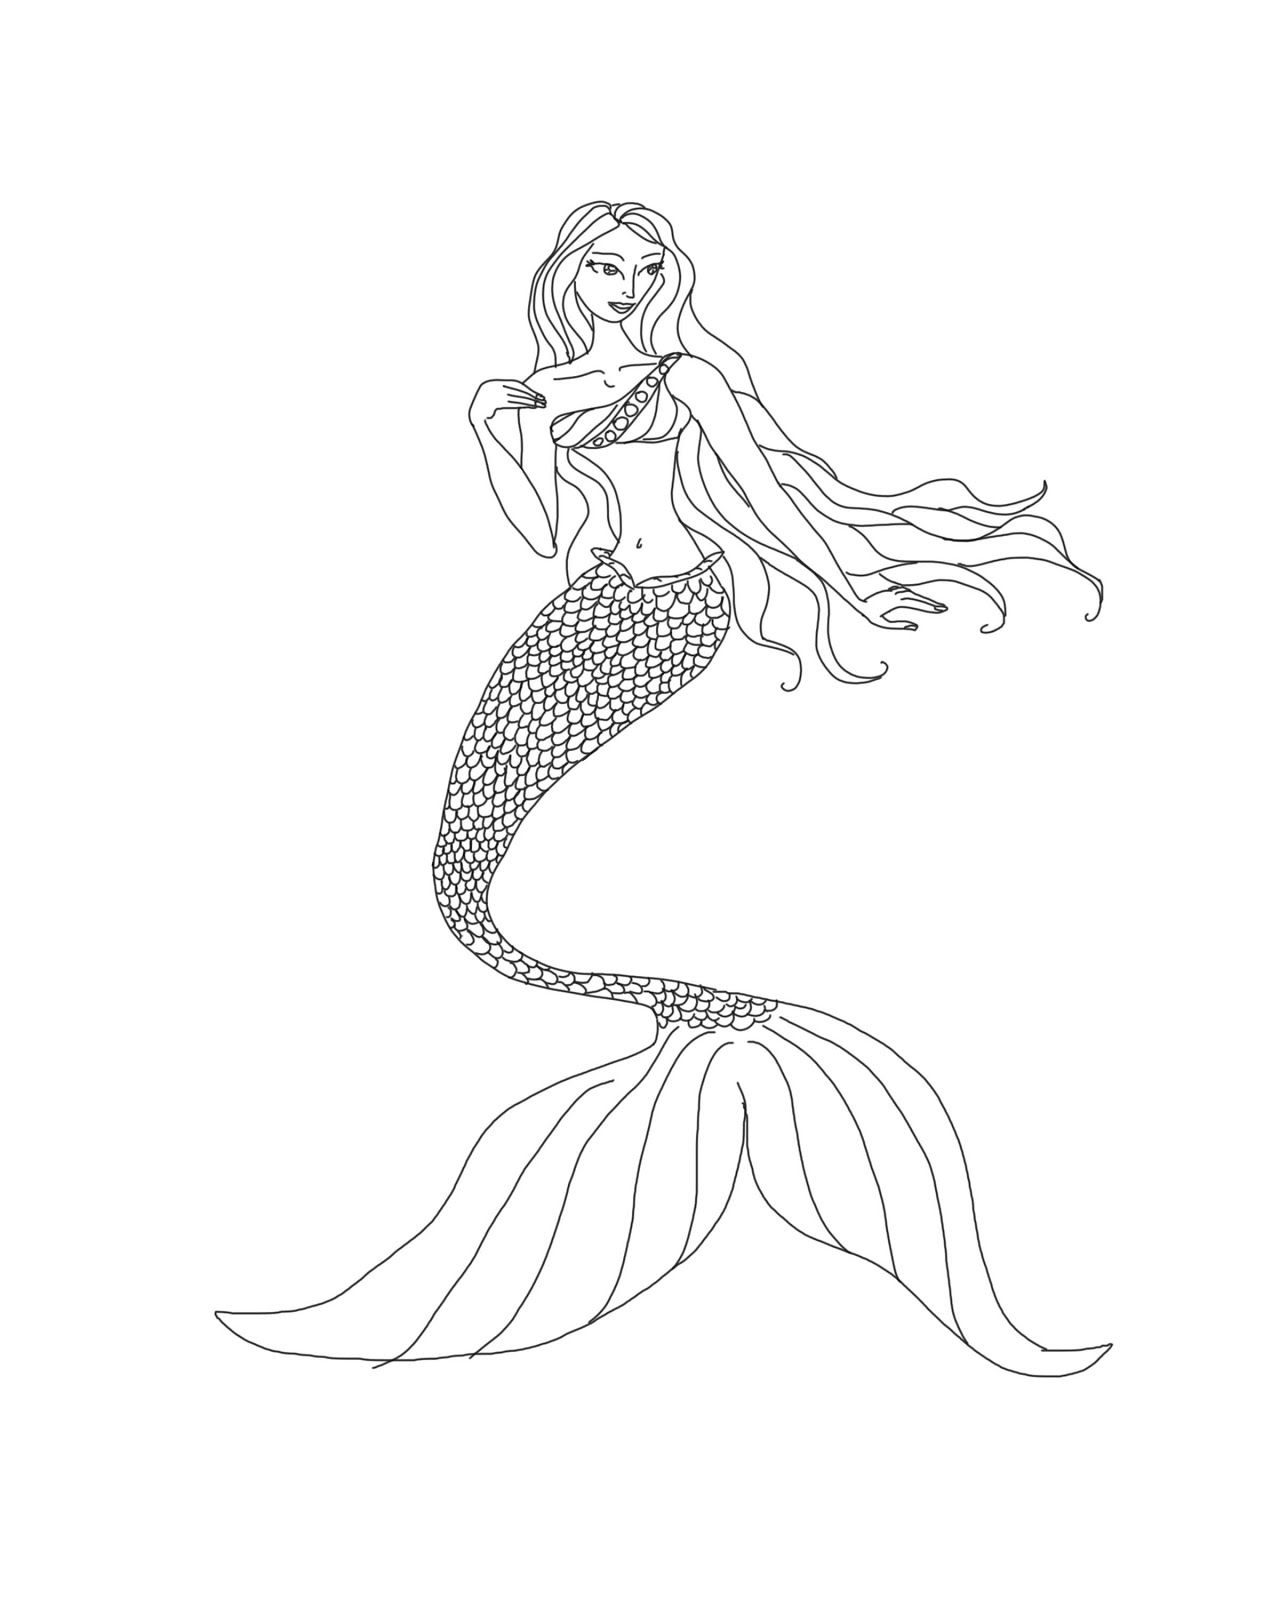 127 Unicorn Simple Mermaid Coloring Pages with disney character